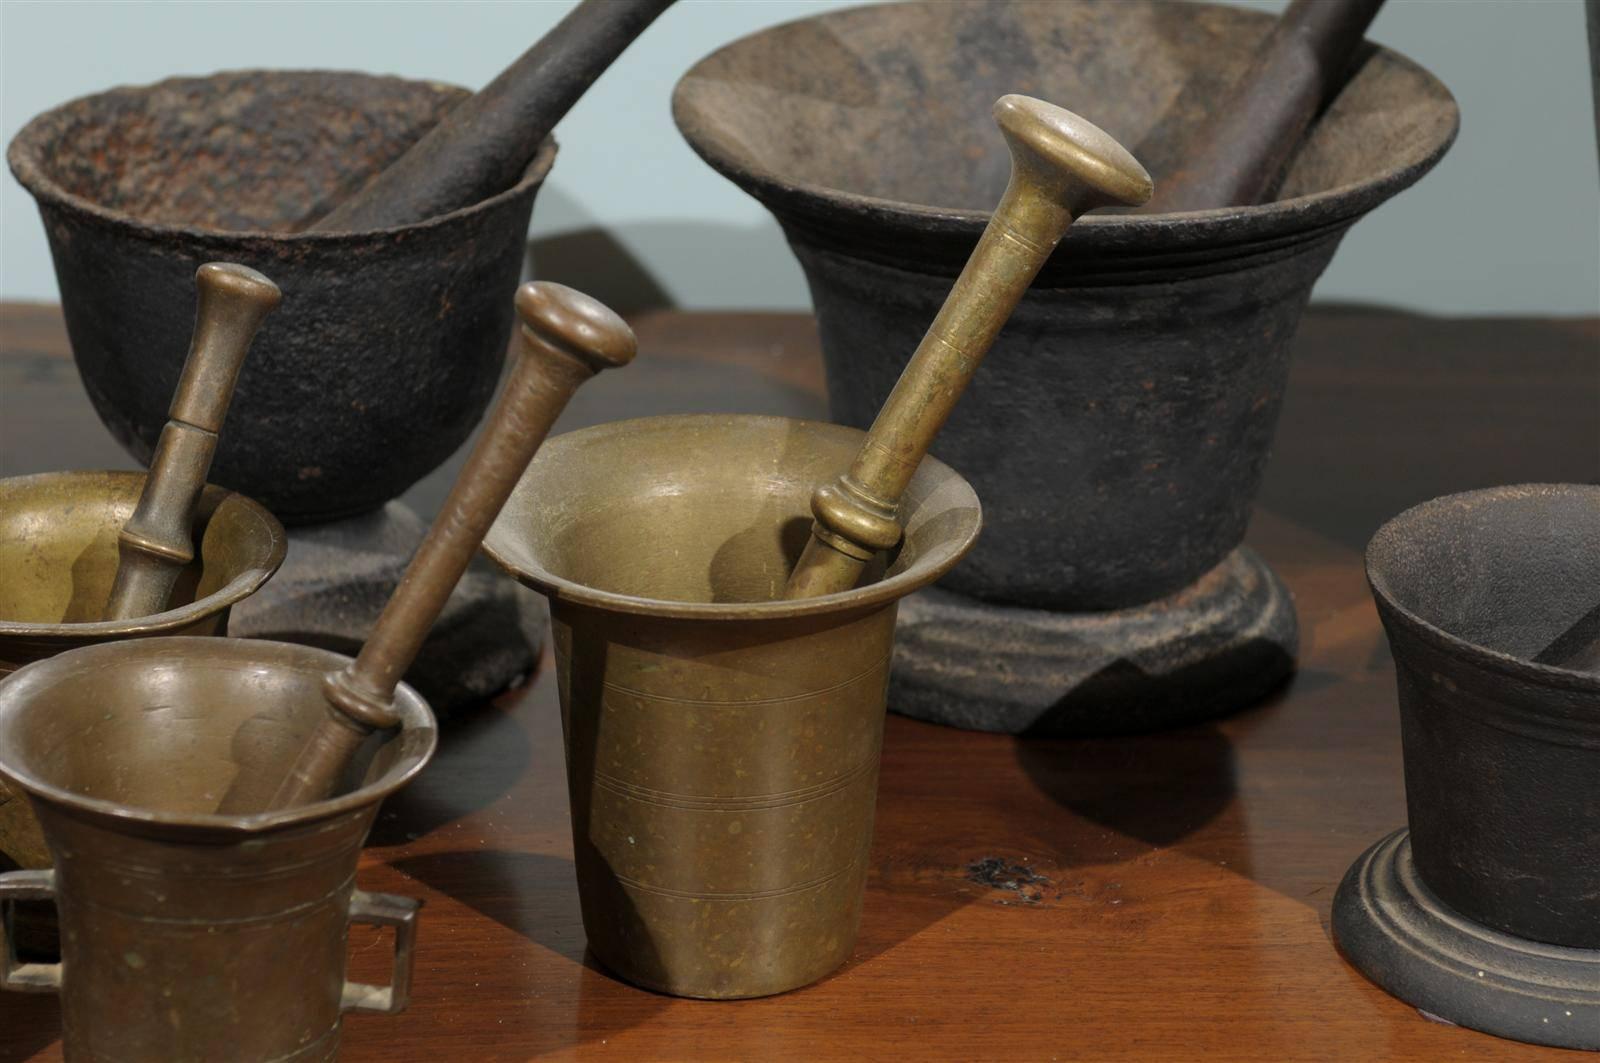 Collection of 18 Mortars and Pestles from a College Professor 2